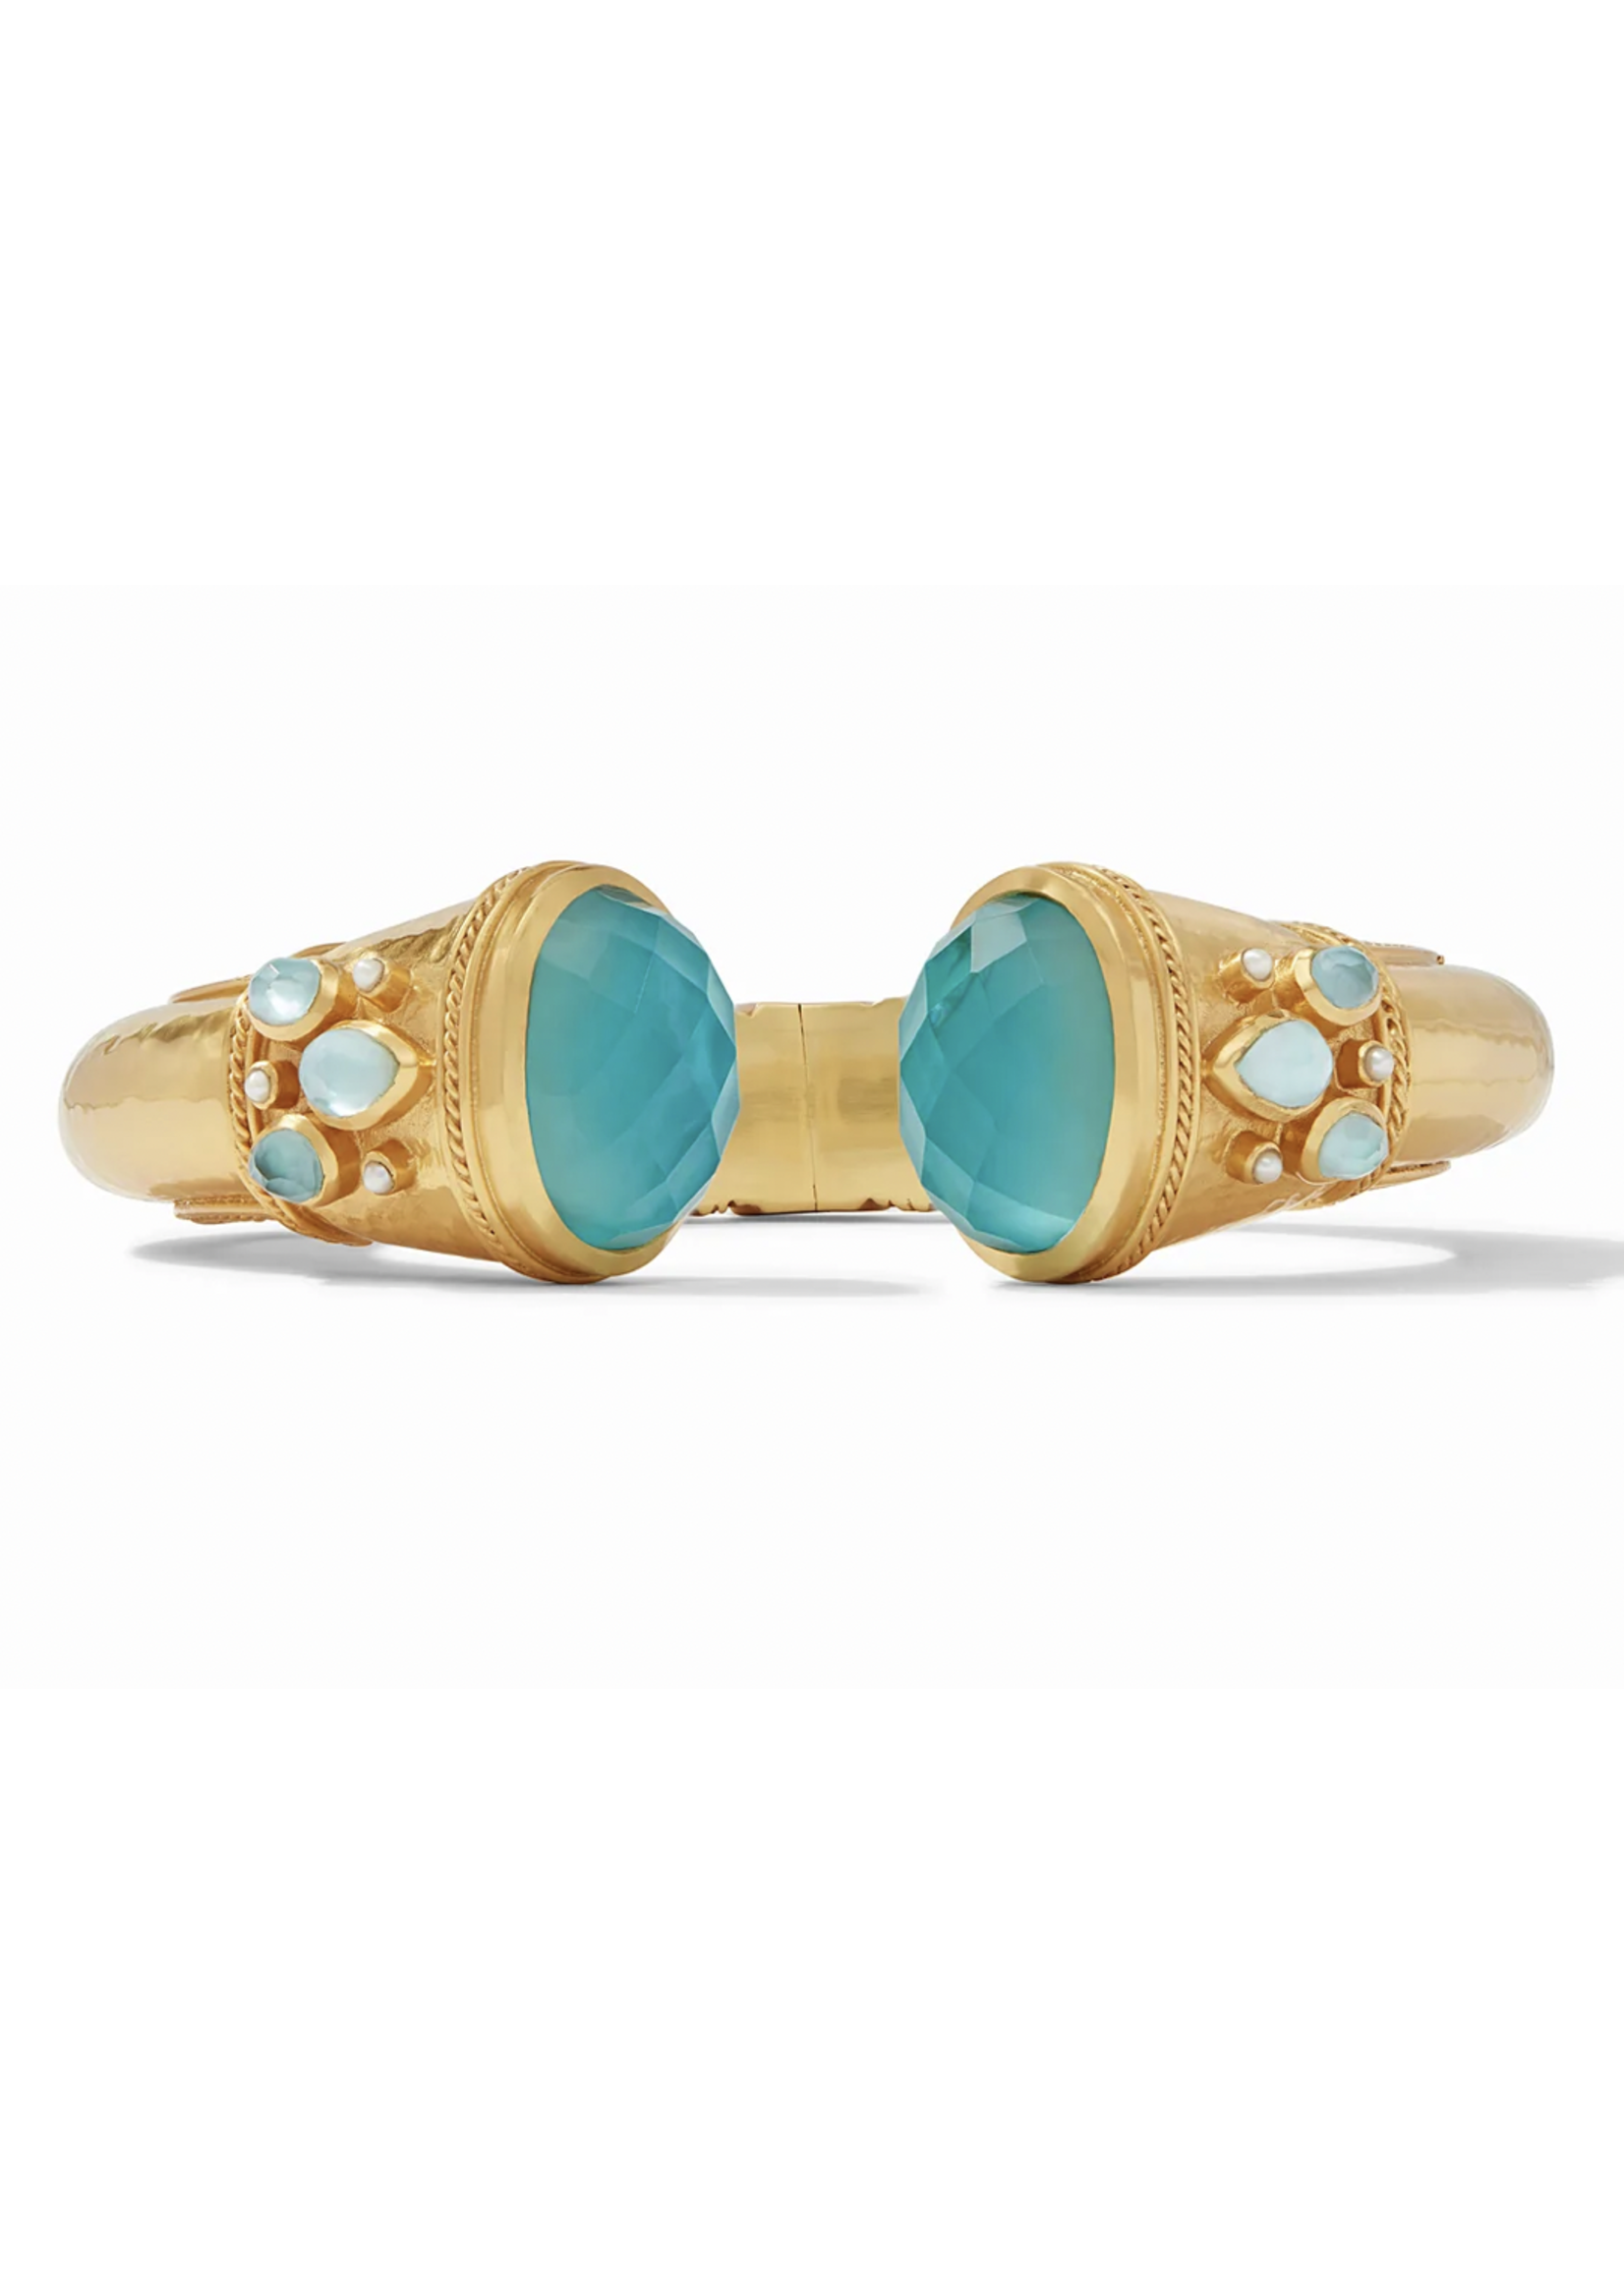 Julie Vos Cassis Cuff Gold Iridescent Bahamian Blue w/ Pearl Accents